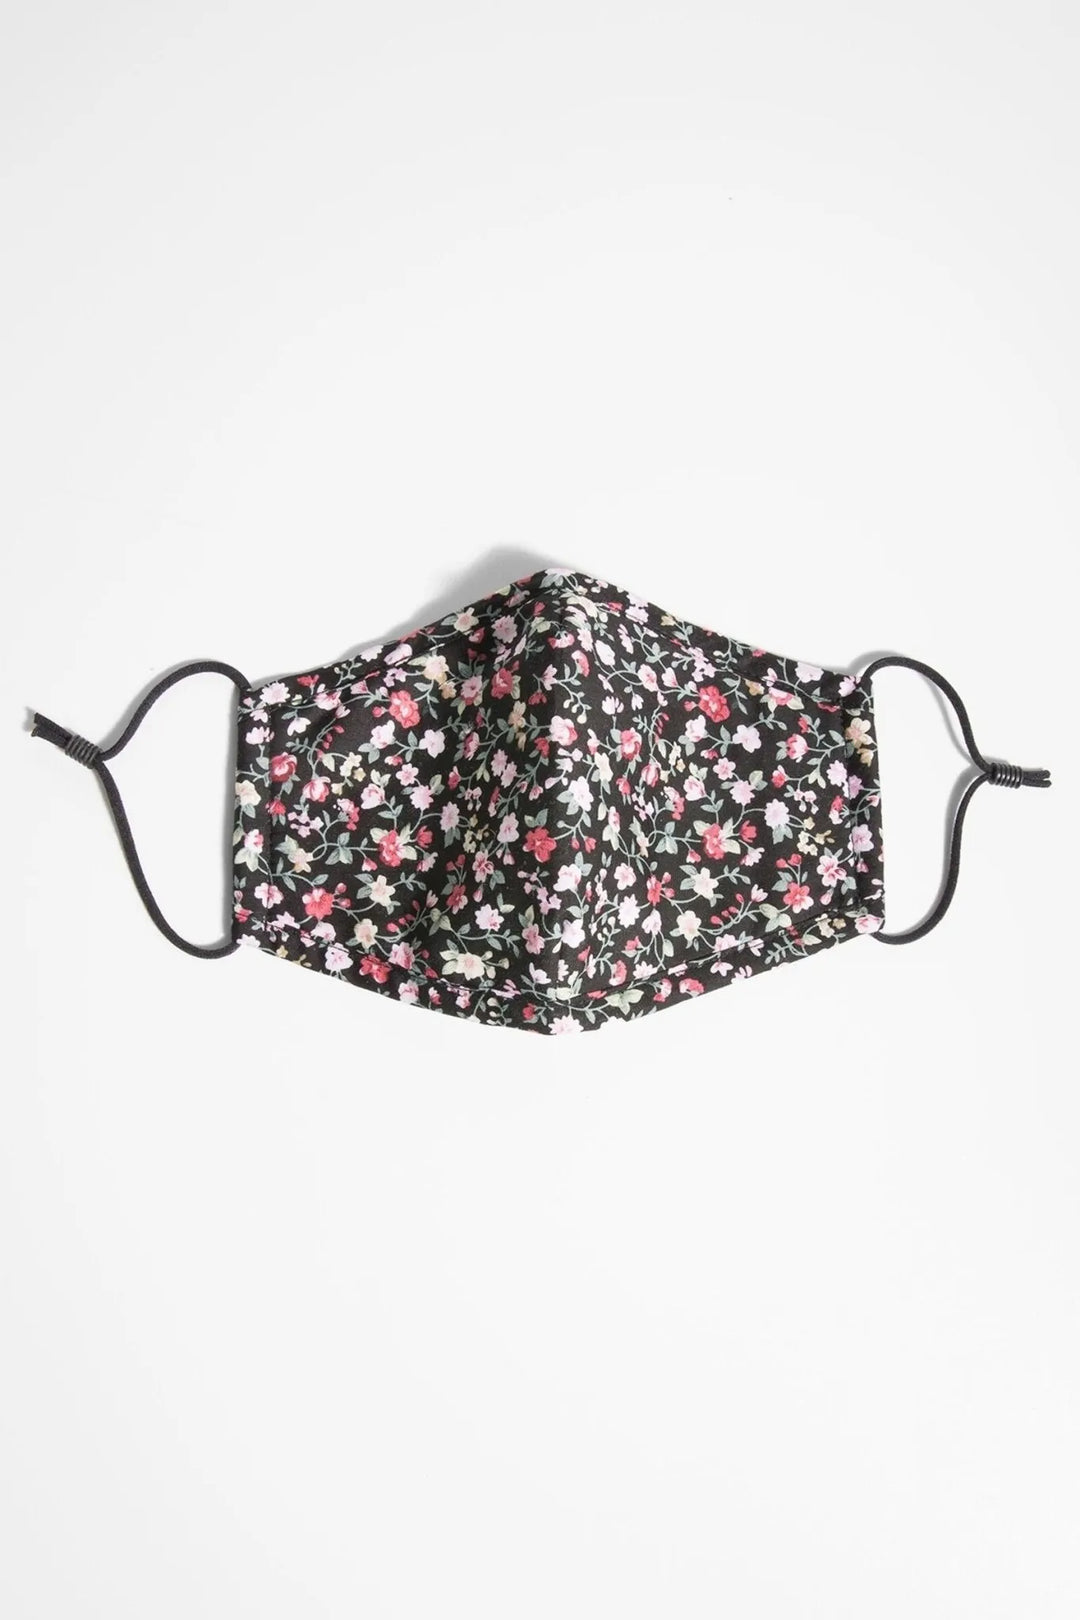 Adjustable Floral Face Mask with Two PM2.5 Filters Black